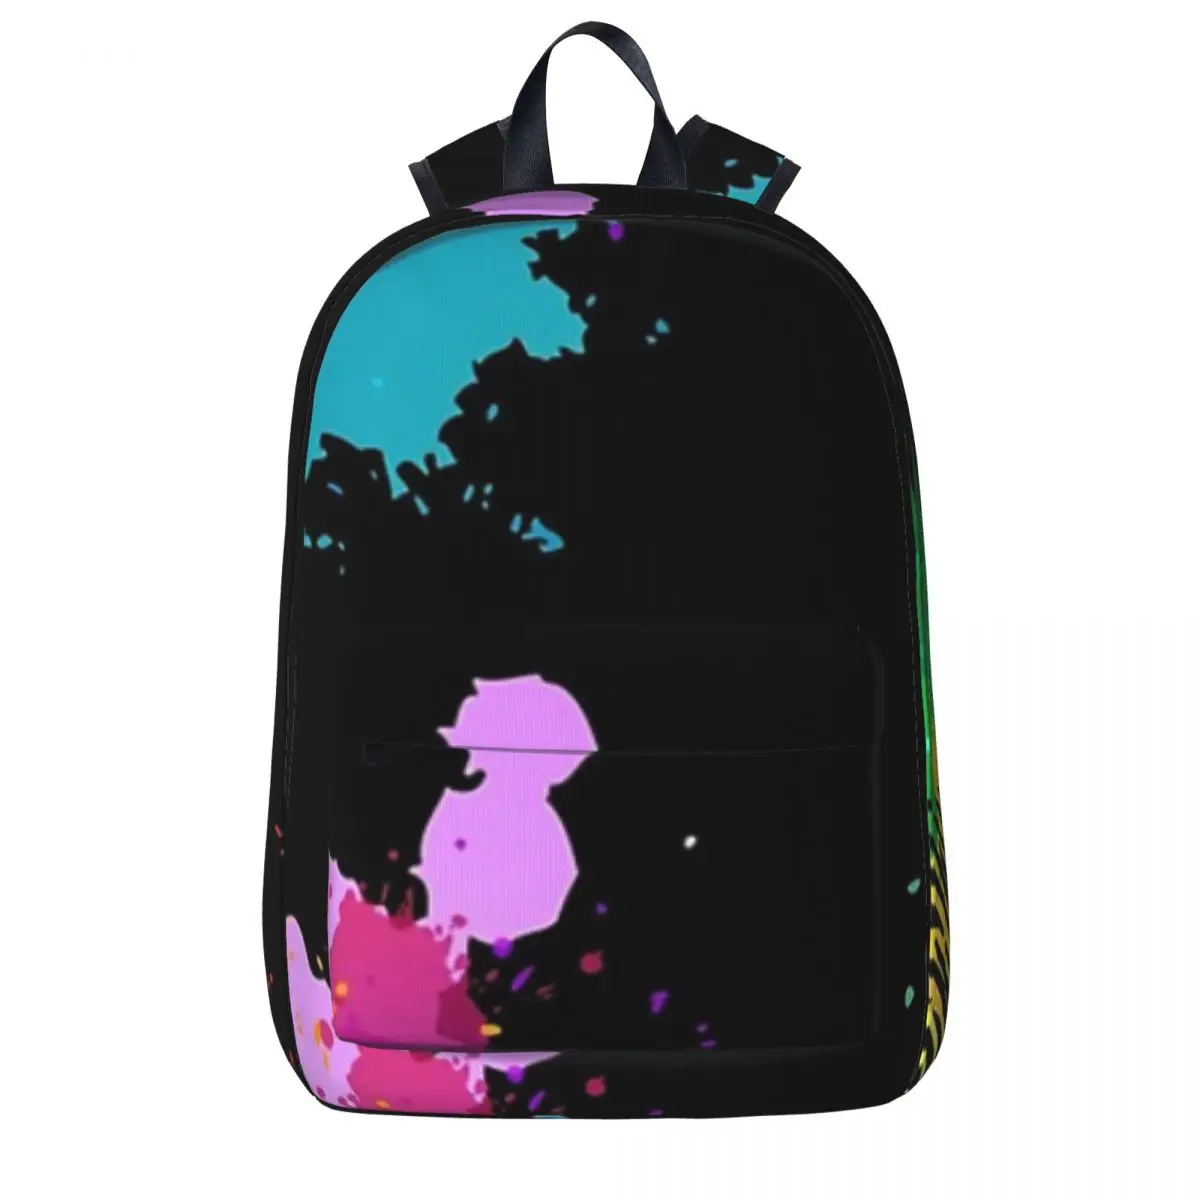 

We Are All Unique In Many Ways Backpack Casual Children School Bag Laptop Rucksack Travel Rucksack Large Capacity Bookbag